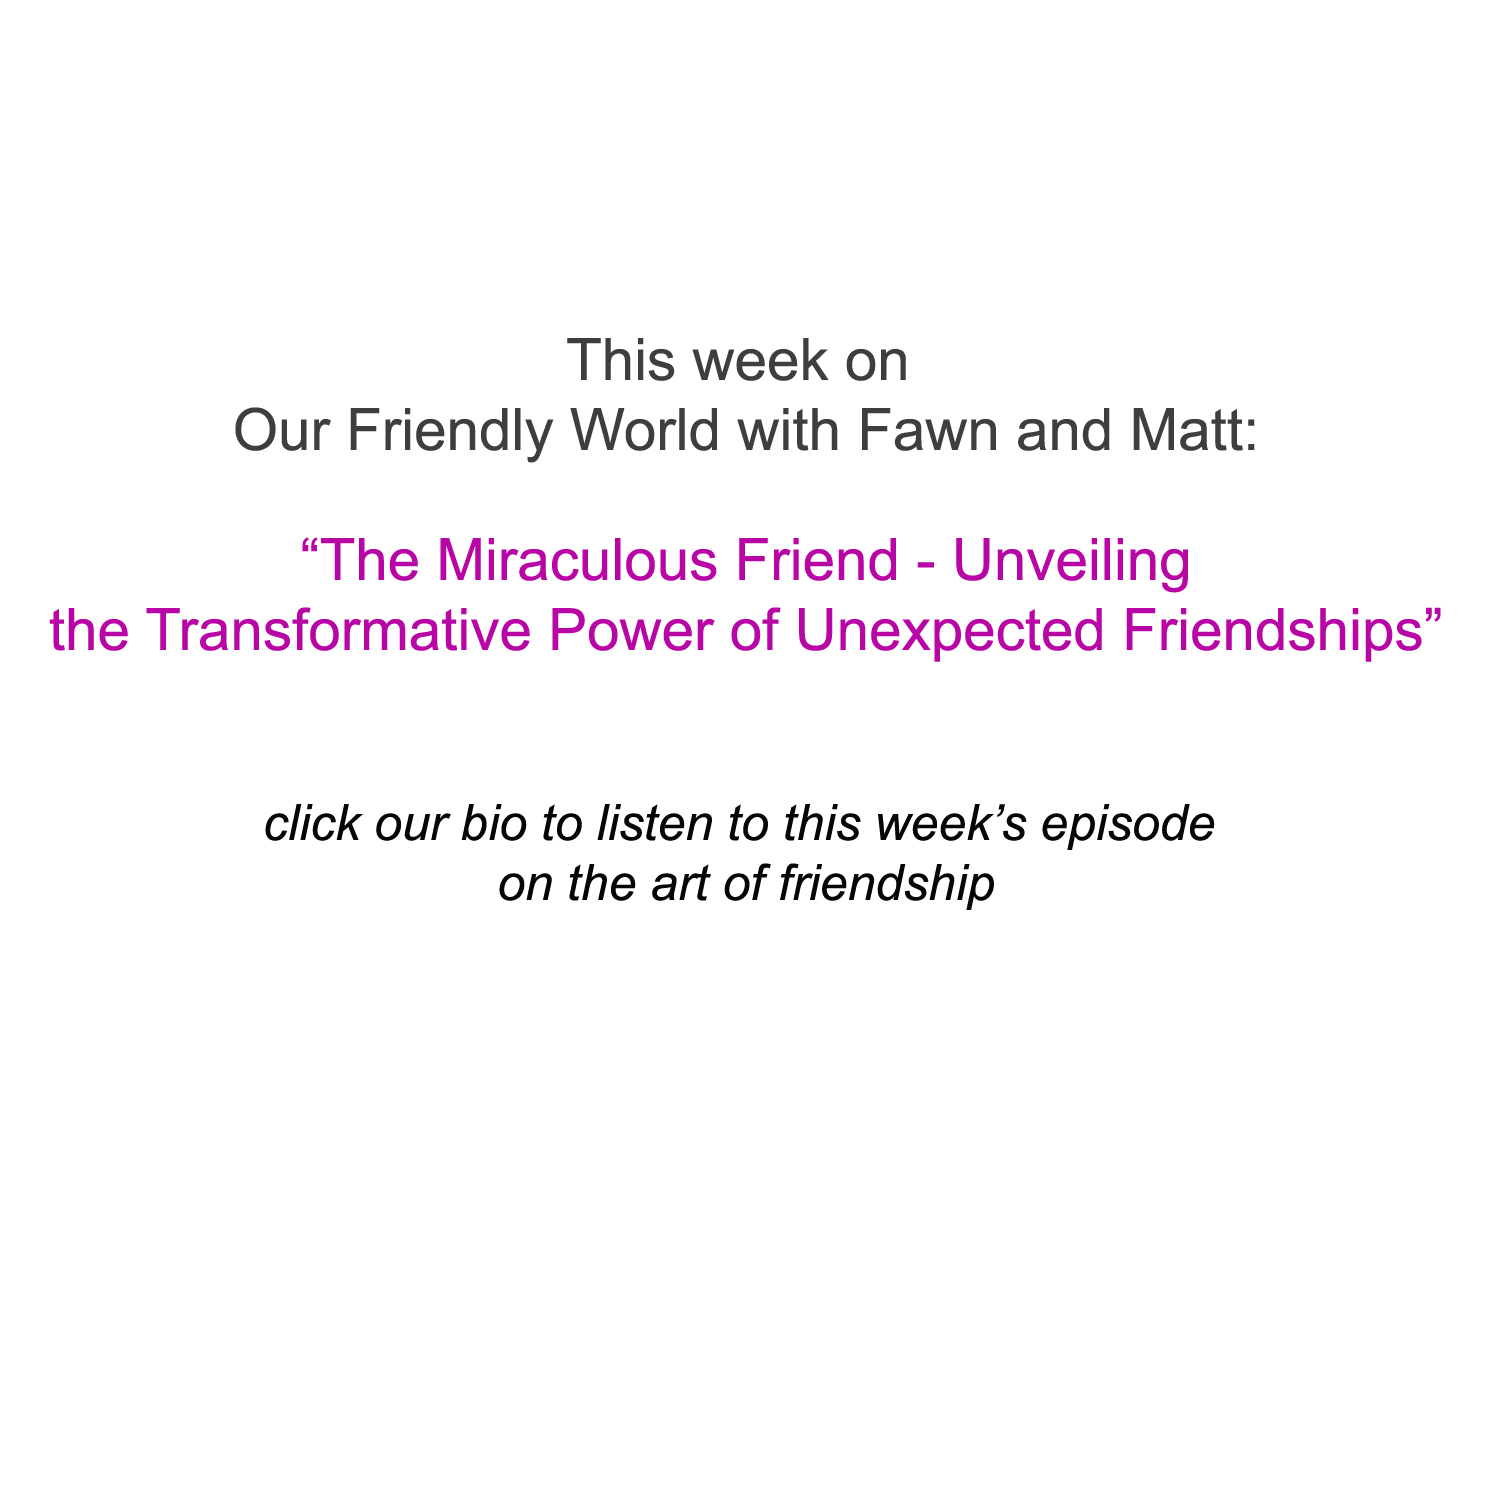 “The Miraculous Friend – Unveiling Miracles: The Transformative Power of Unexpected Friendships"